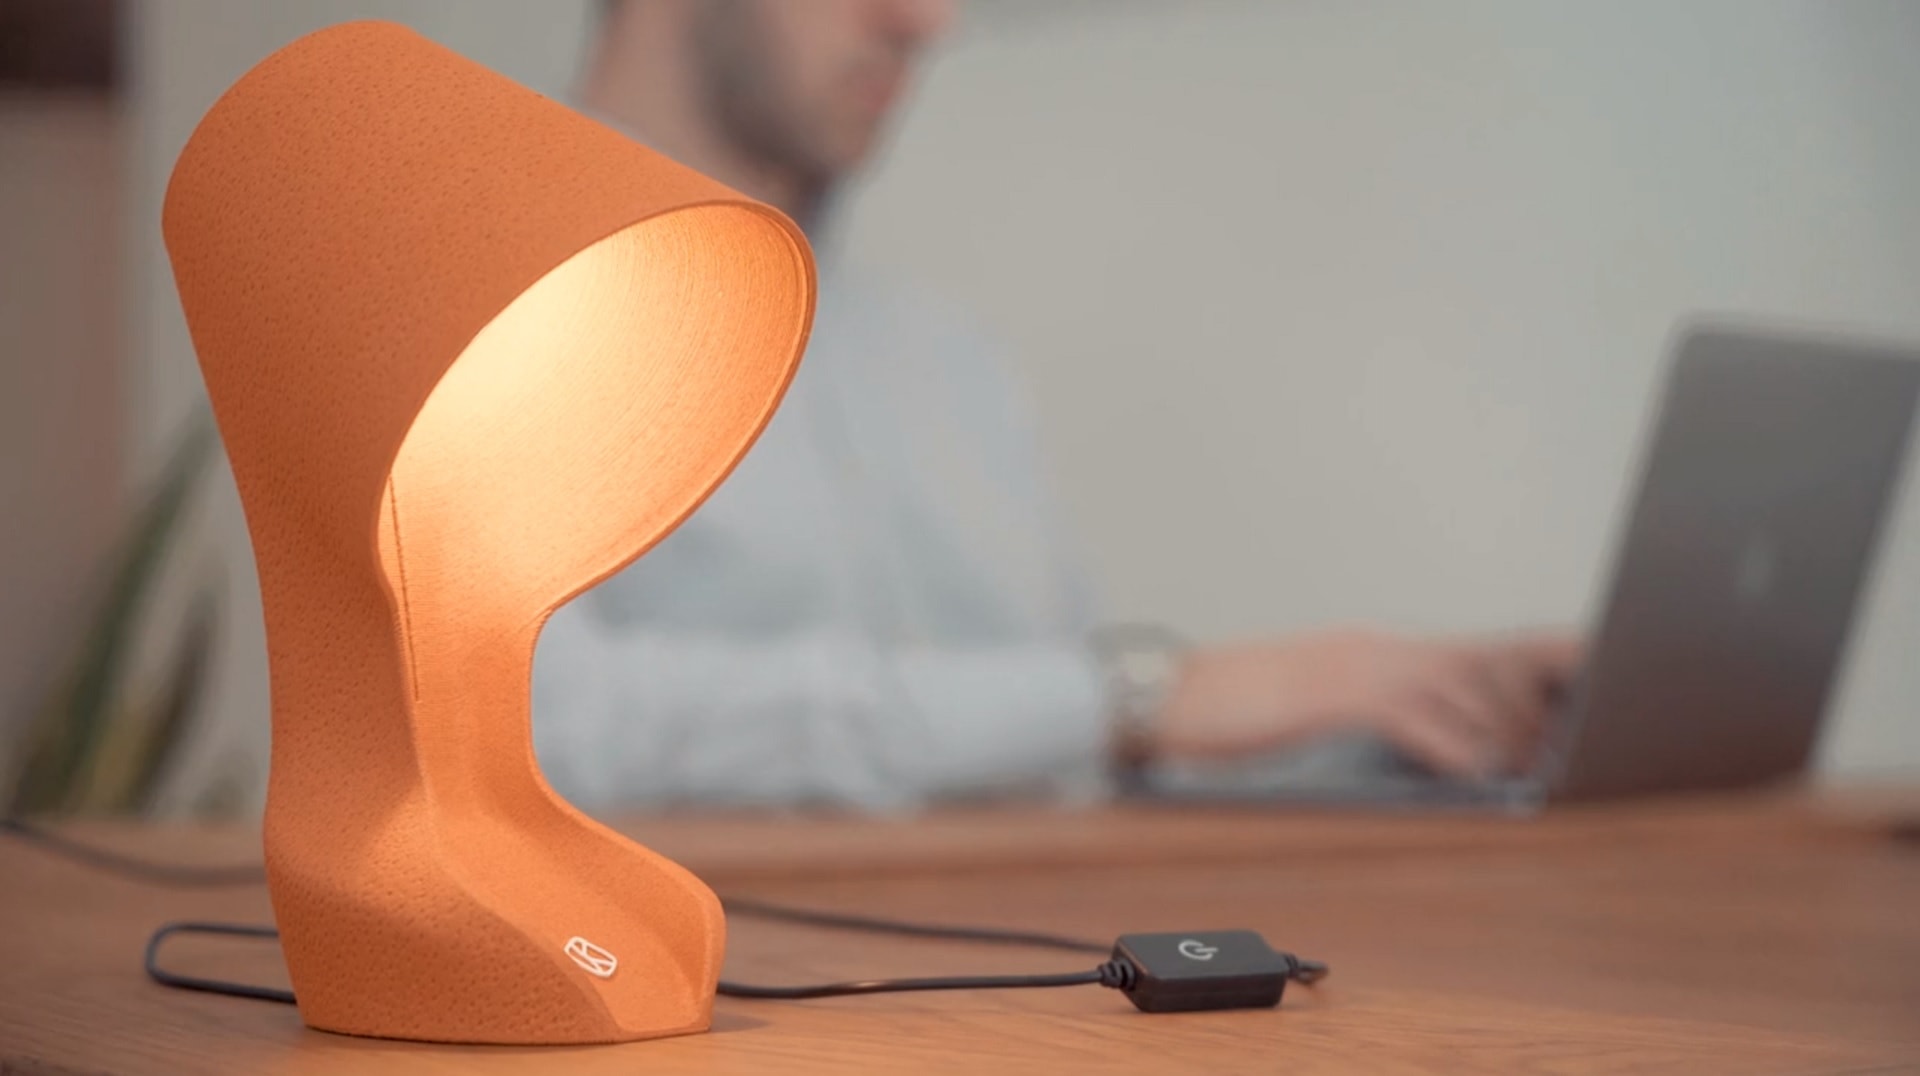 Ohmie is a 3D-printed lamp made from orange peels